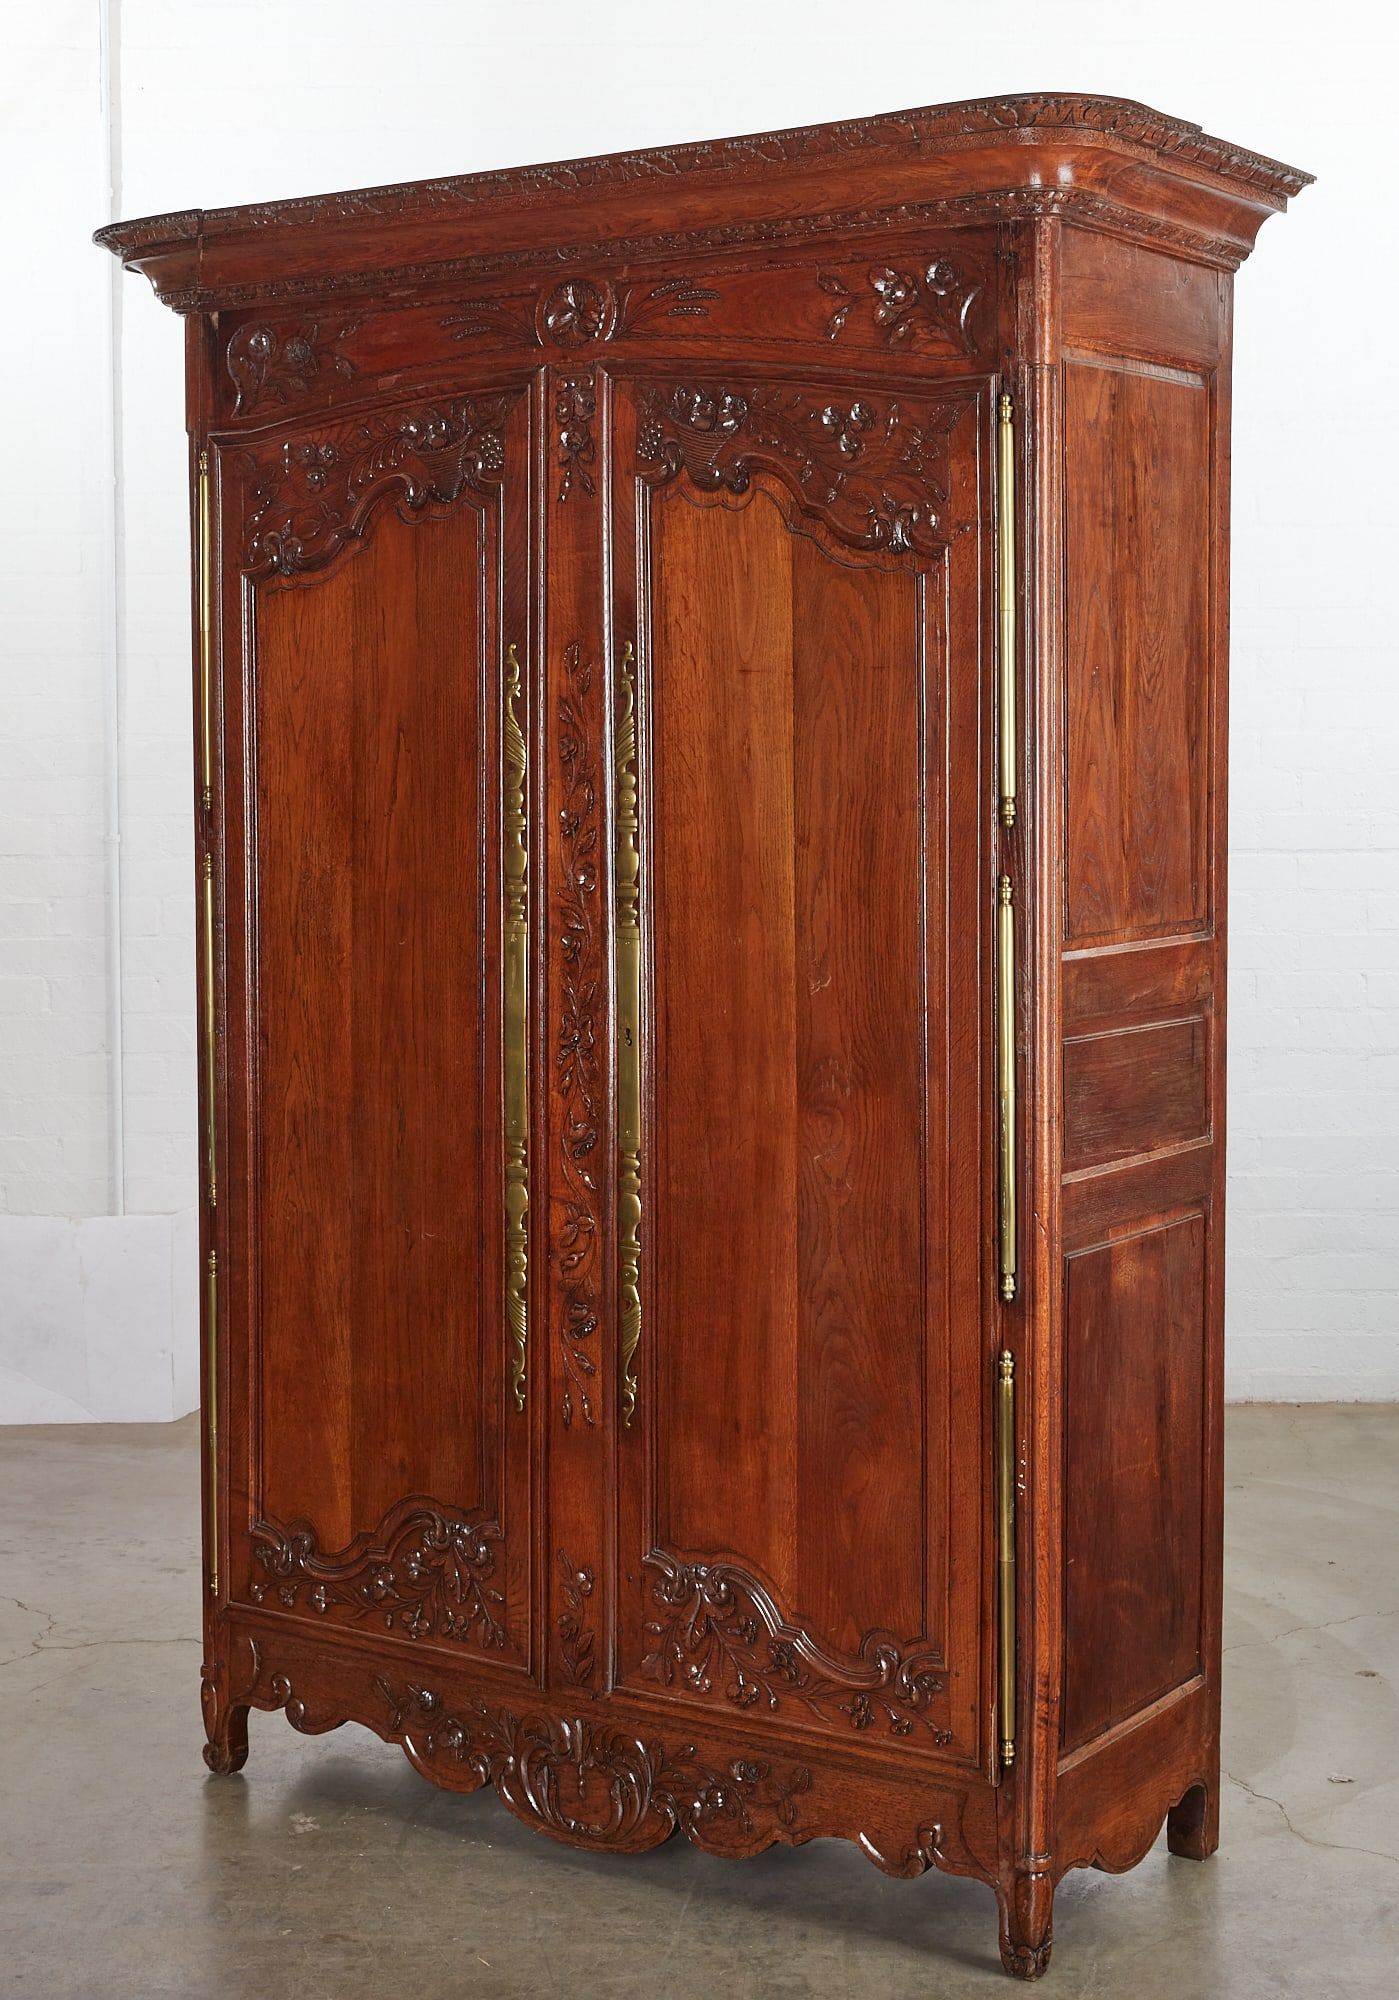 A FRENCH PROVINCIAL CARVED WALNUT